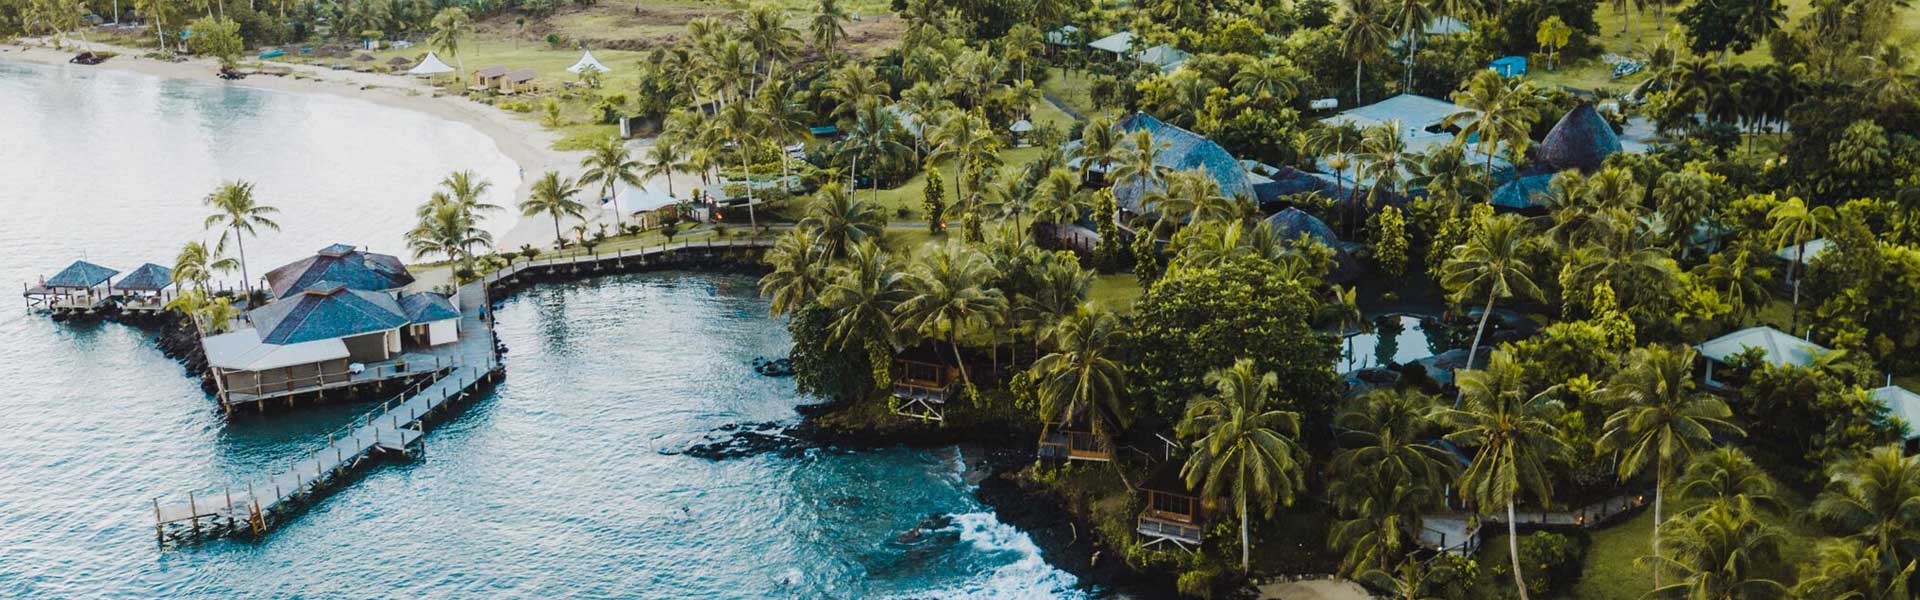 Samoa Serenity: 7-Night Escape with All-Meals, Transfers & More!